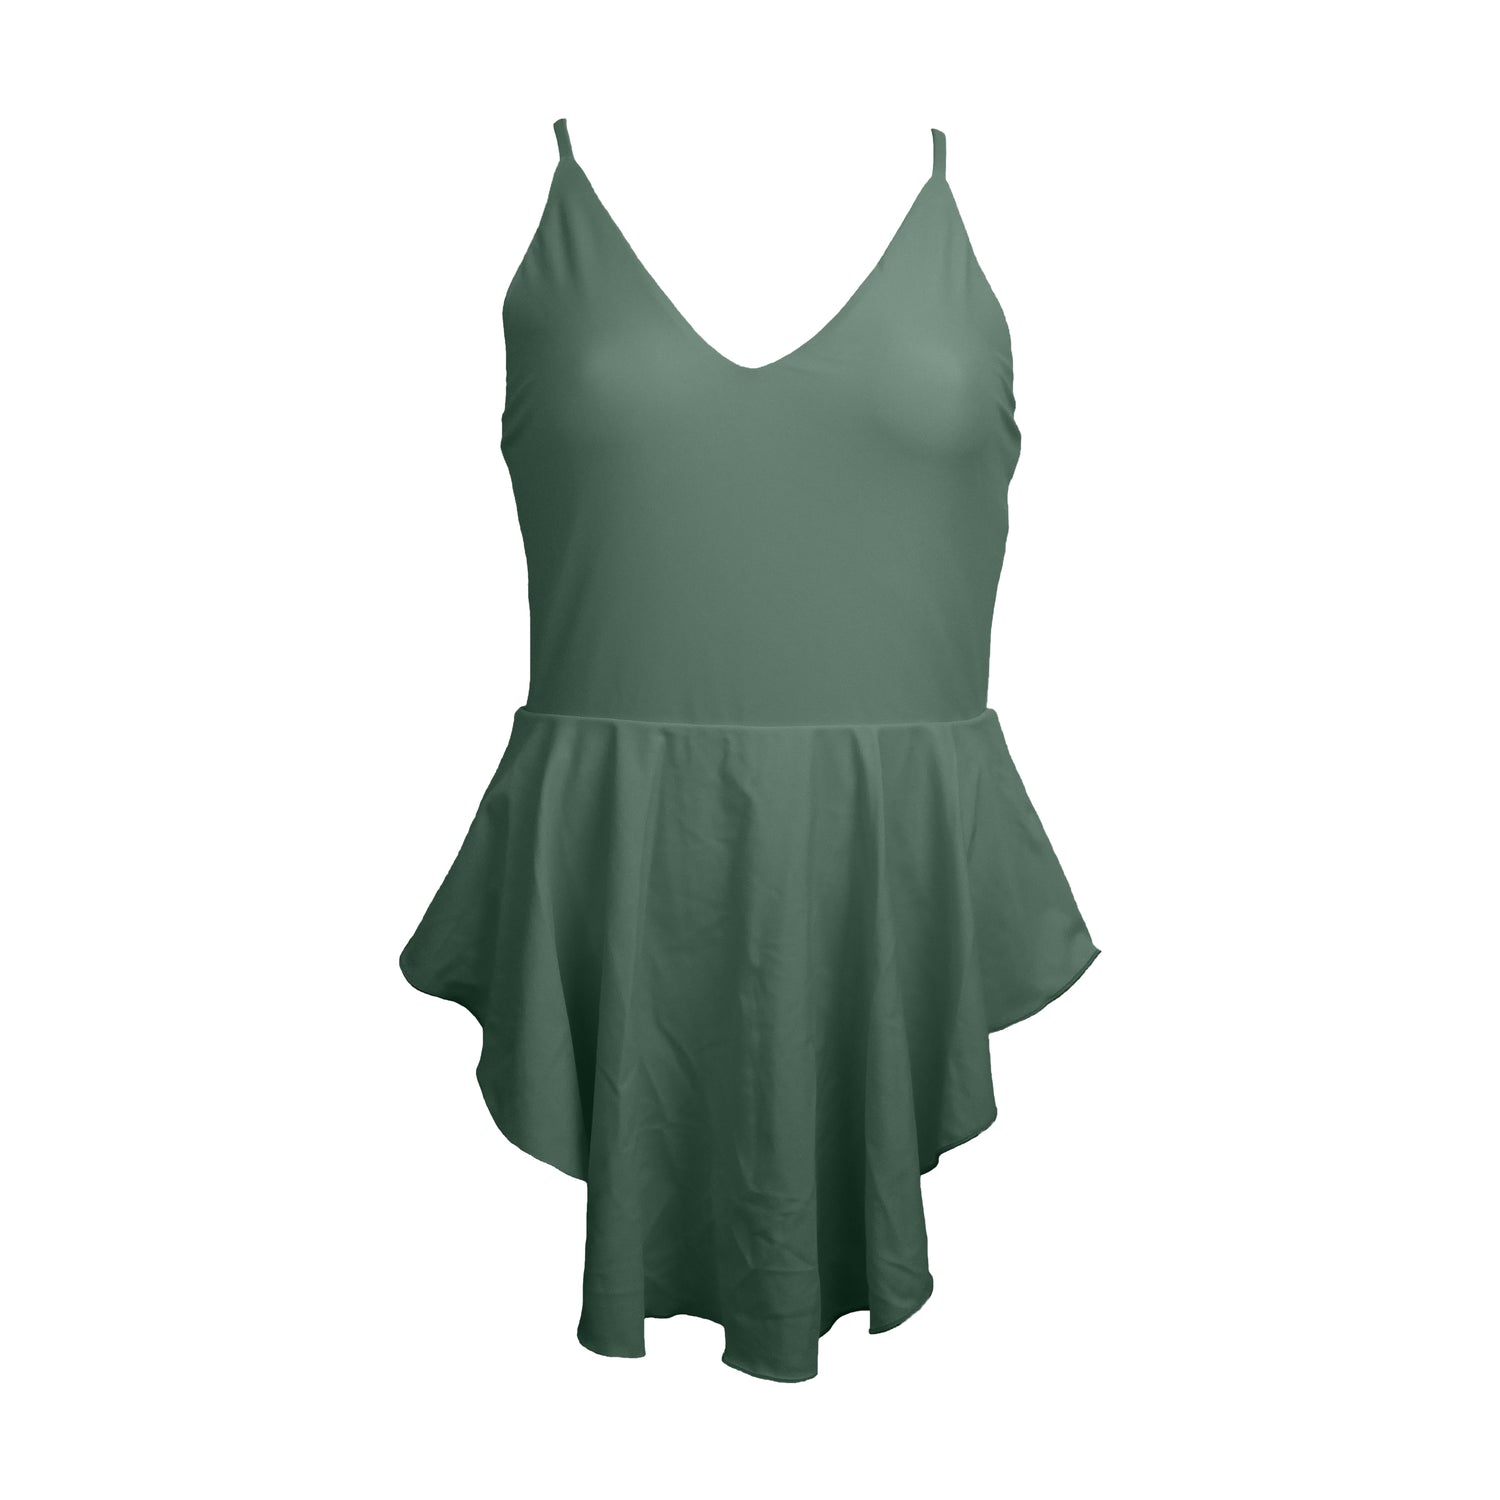 Sage green simplistic plunging v-neck one piece swimsuit with an added high-low skater skirt overlay. Under the skirt layer the bodys bottom half has a low  back, high cut legs and full coverage.